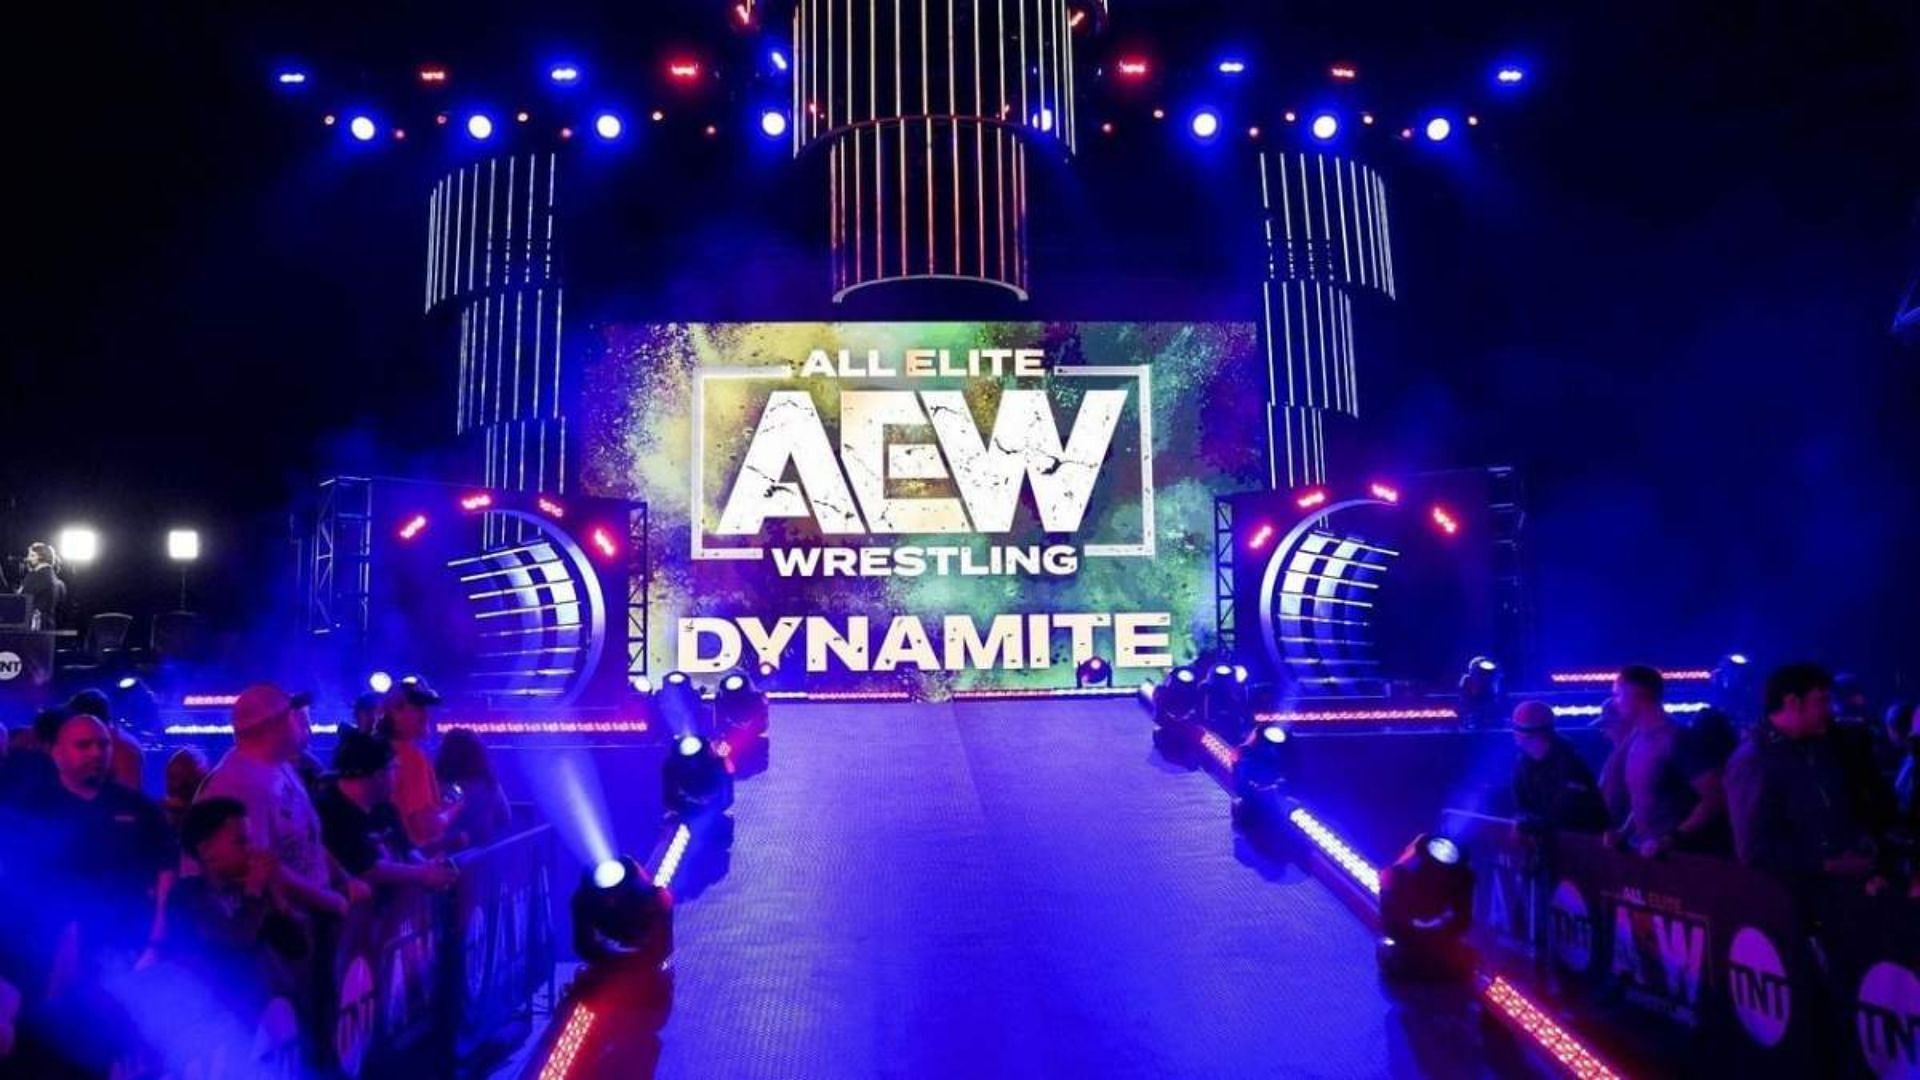 What can fans expect for the upcoming AEW Dynamite episode?